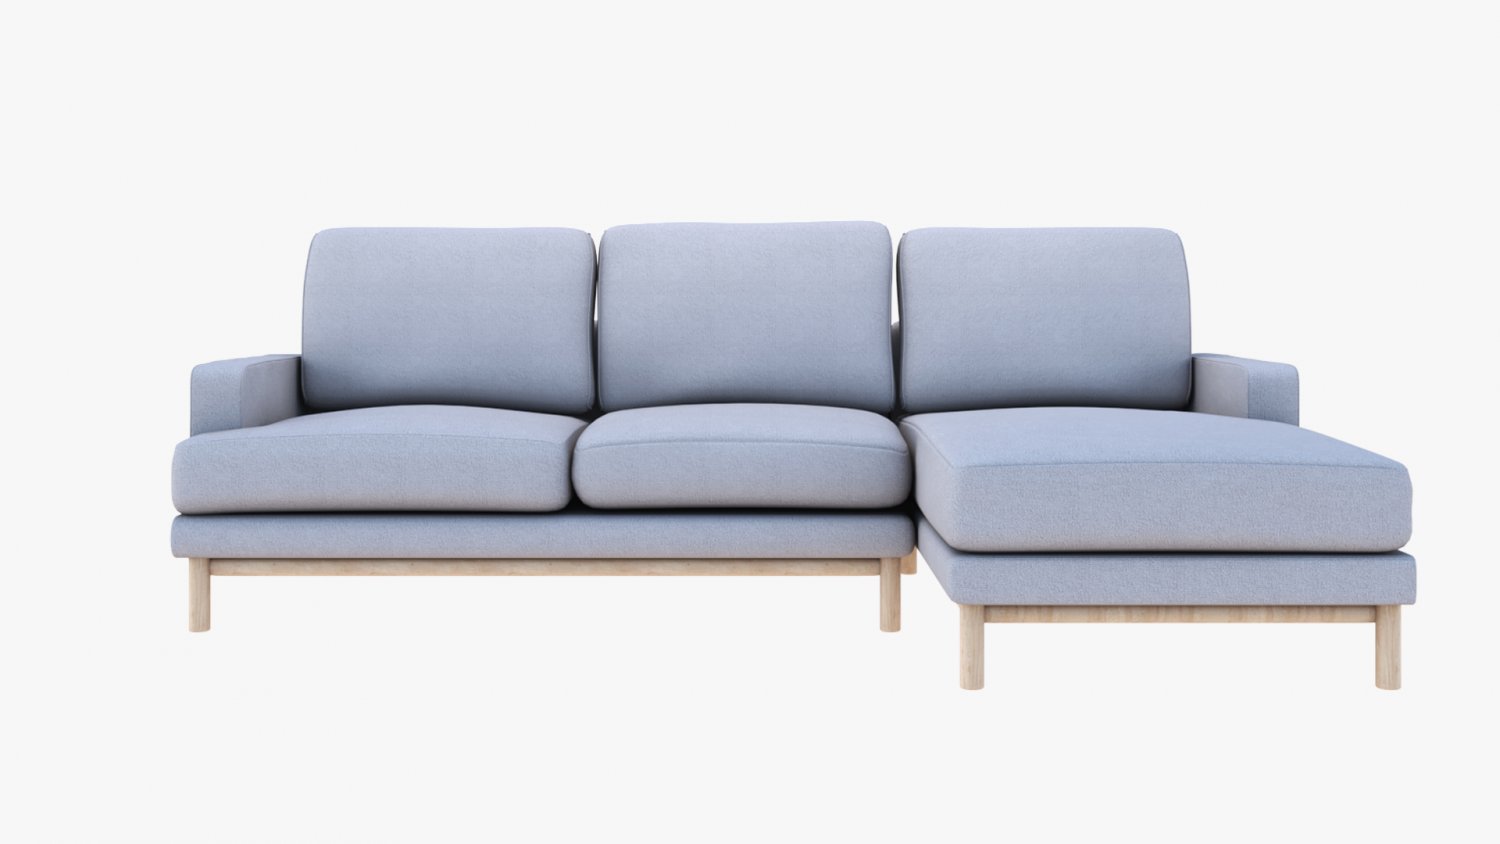 Comfy Couch Bliss: Discover the Cozy Comforts of a Double Wide Chaise Sofa